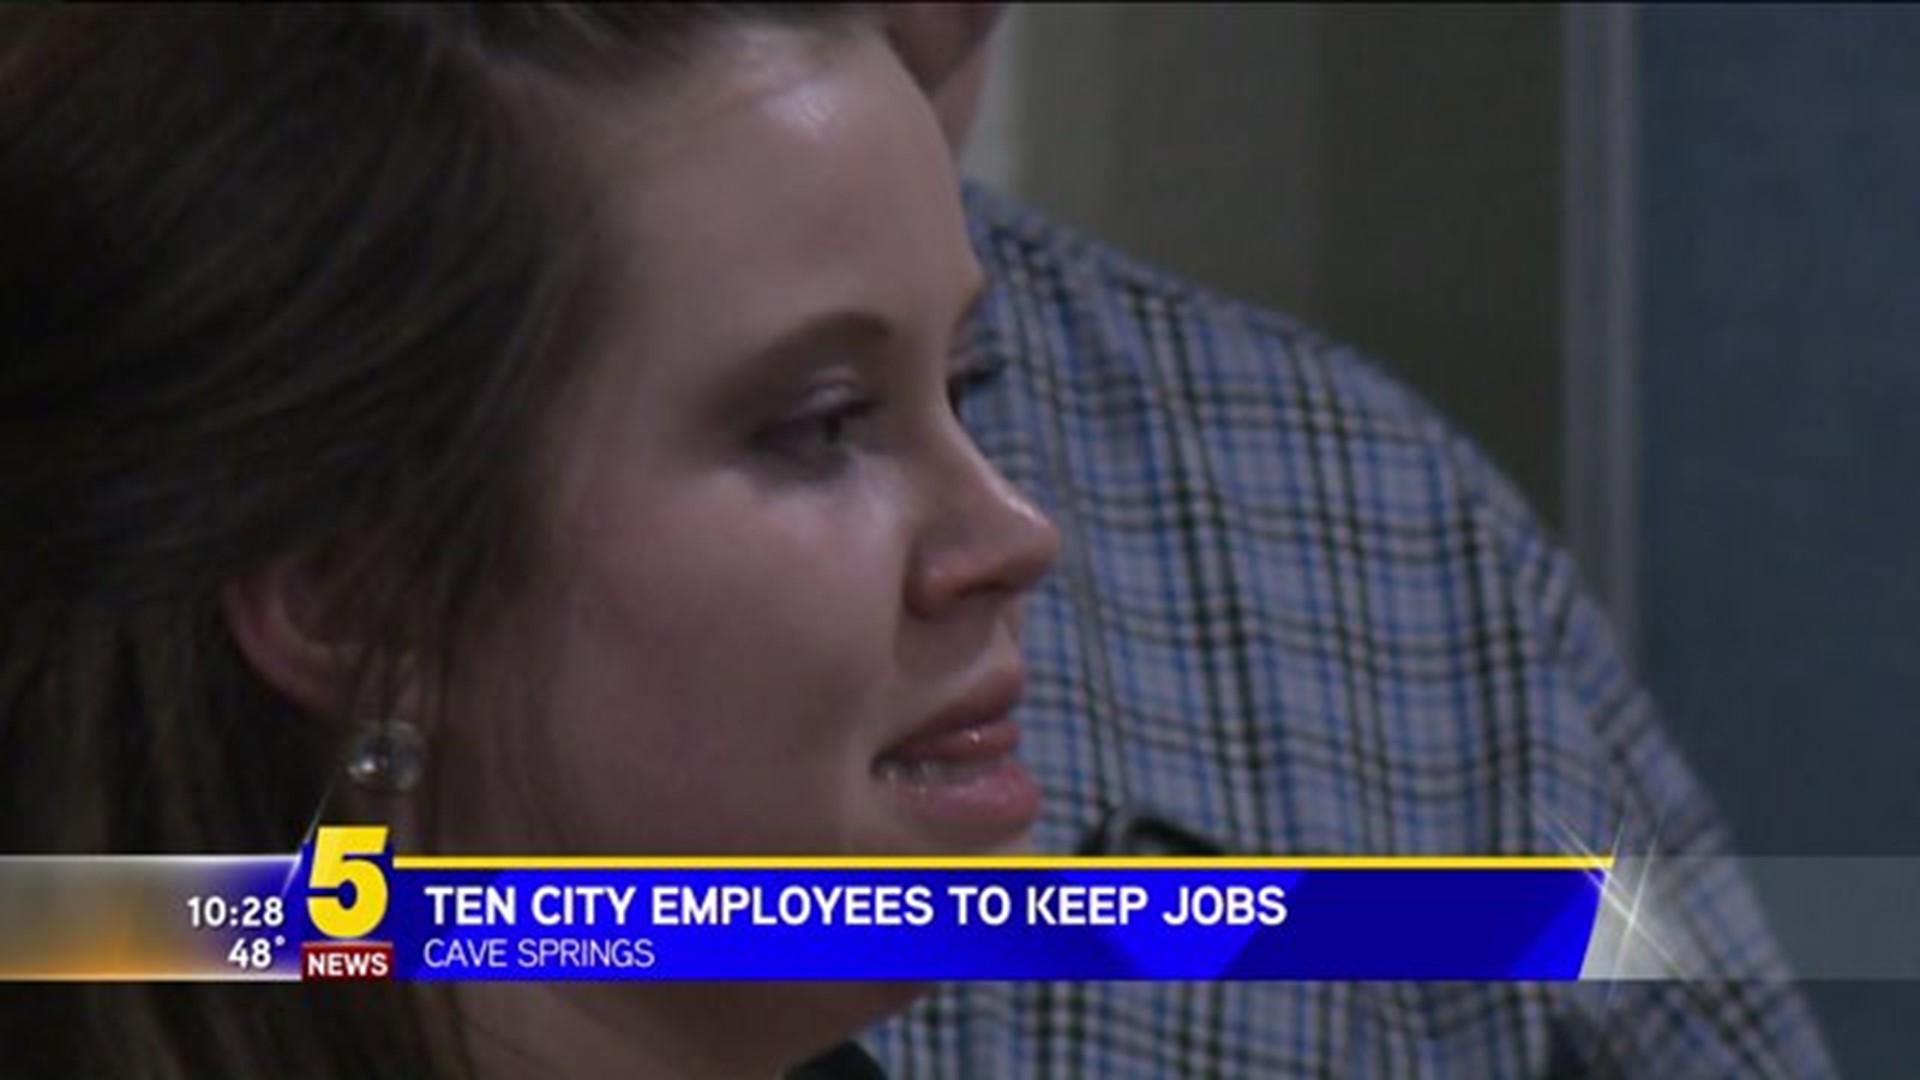 CAVE SPRINGS CITY EMPLOYEES KEEP JOBS